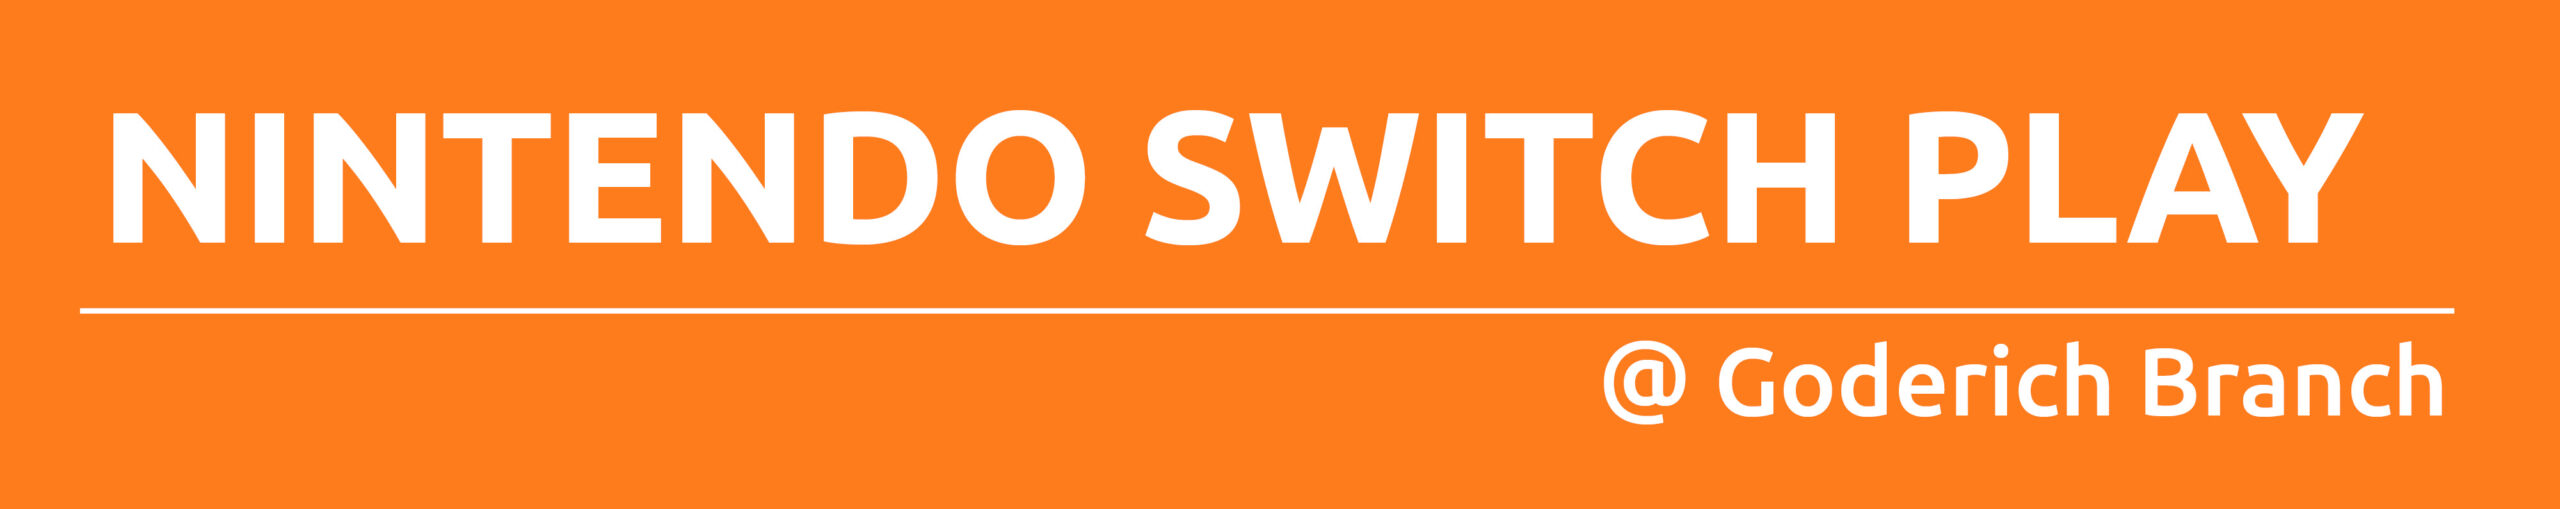 Orange rectangle with white text promoting Nintendo Switch Free PLay at Goderich